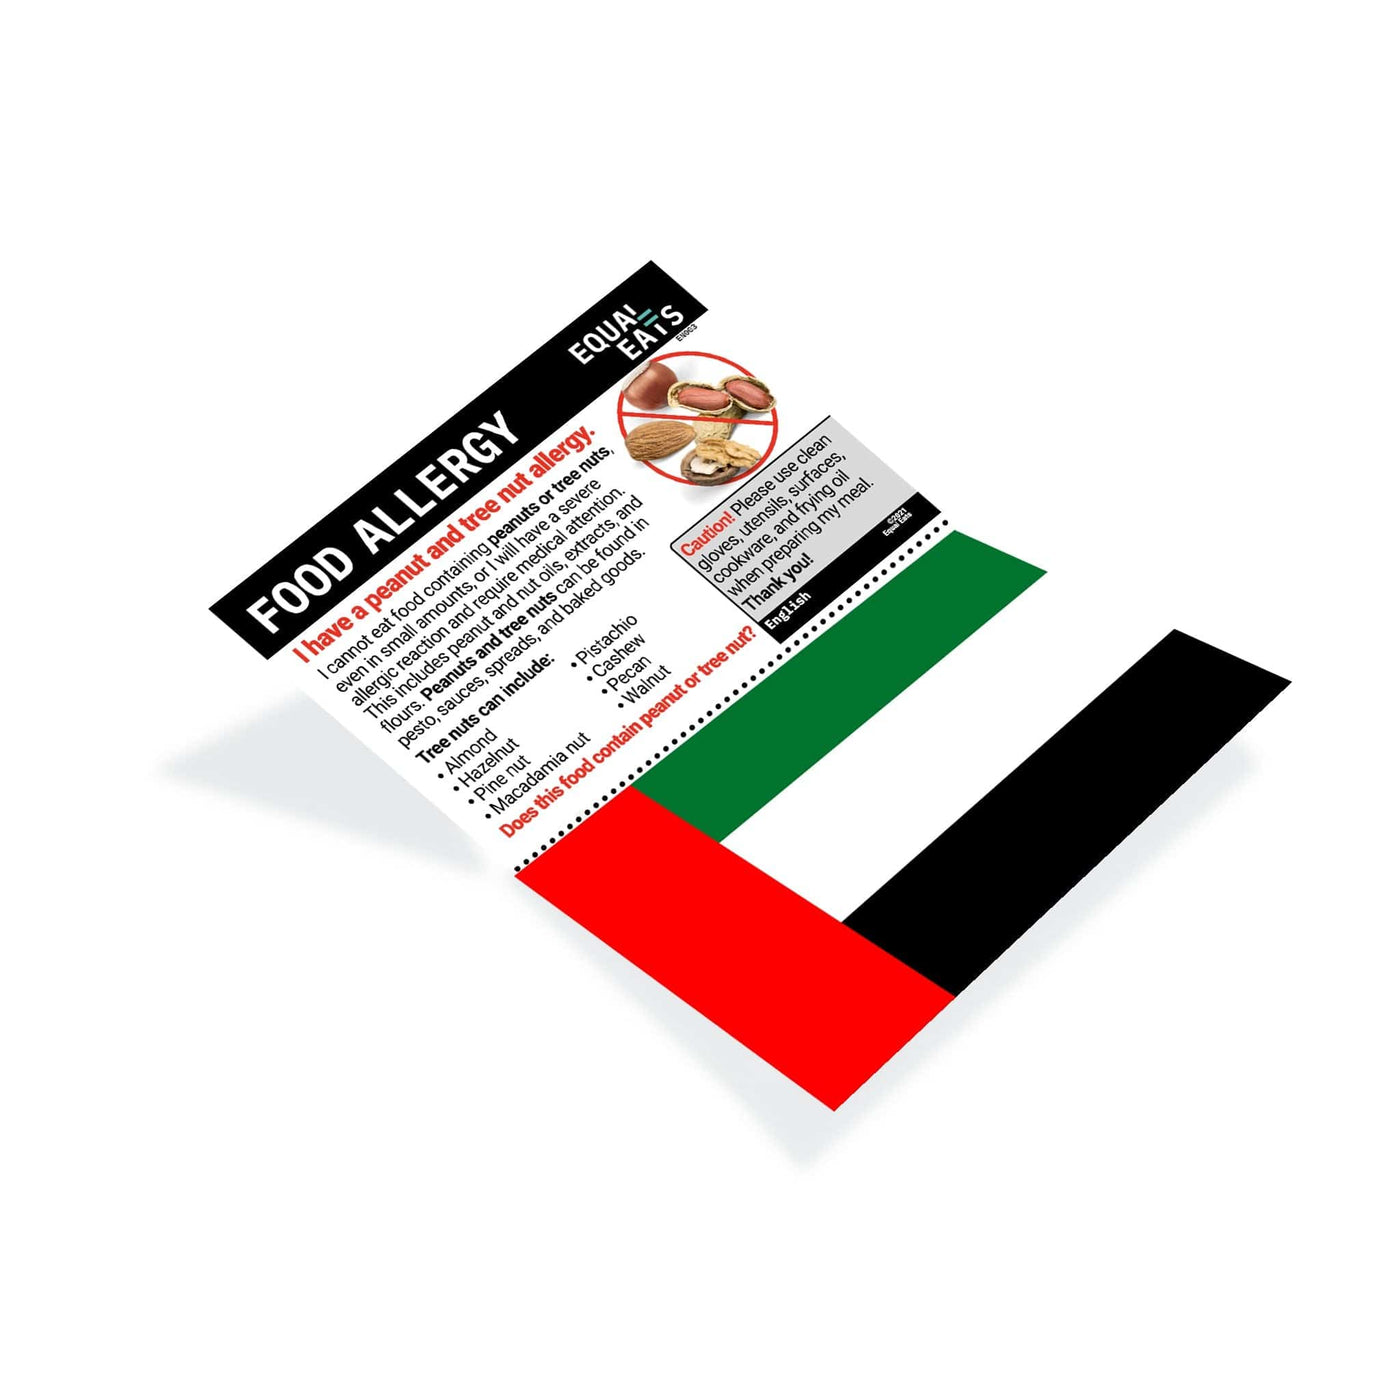 Printable Peanut and Tree Nut Allergy Card in Arabic